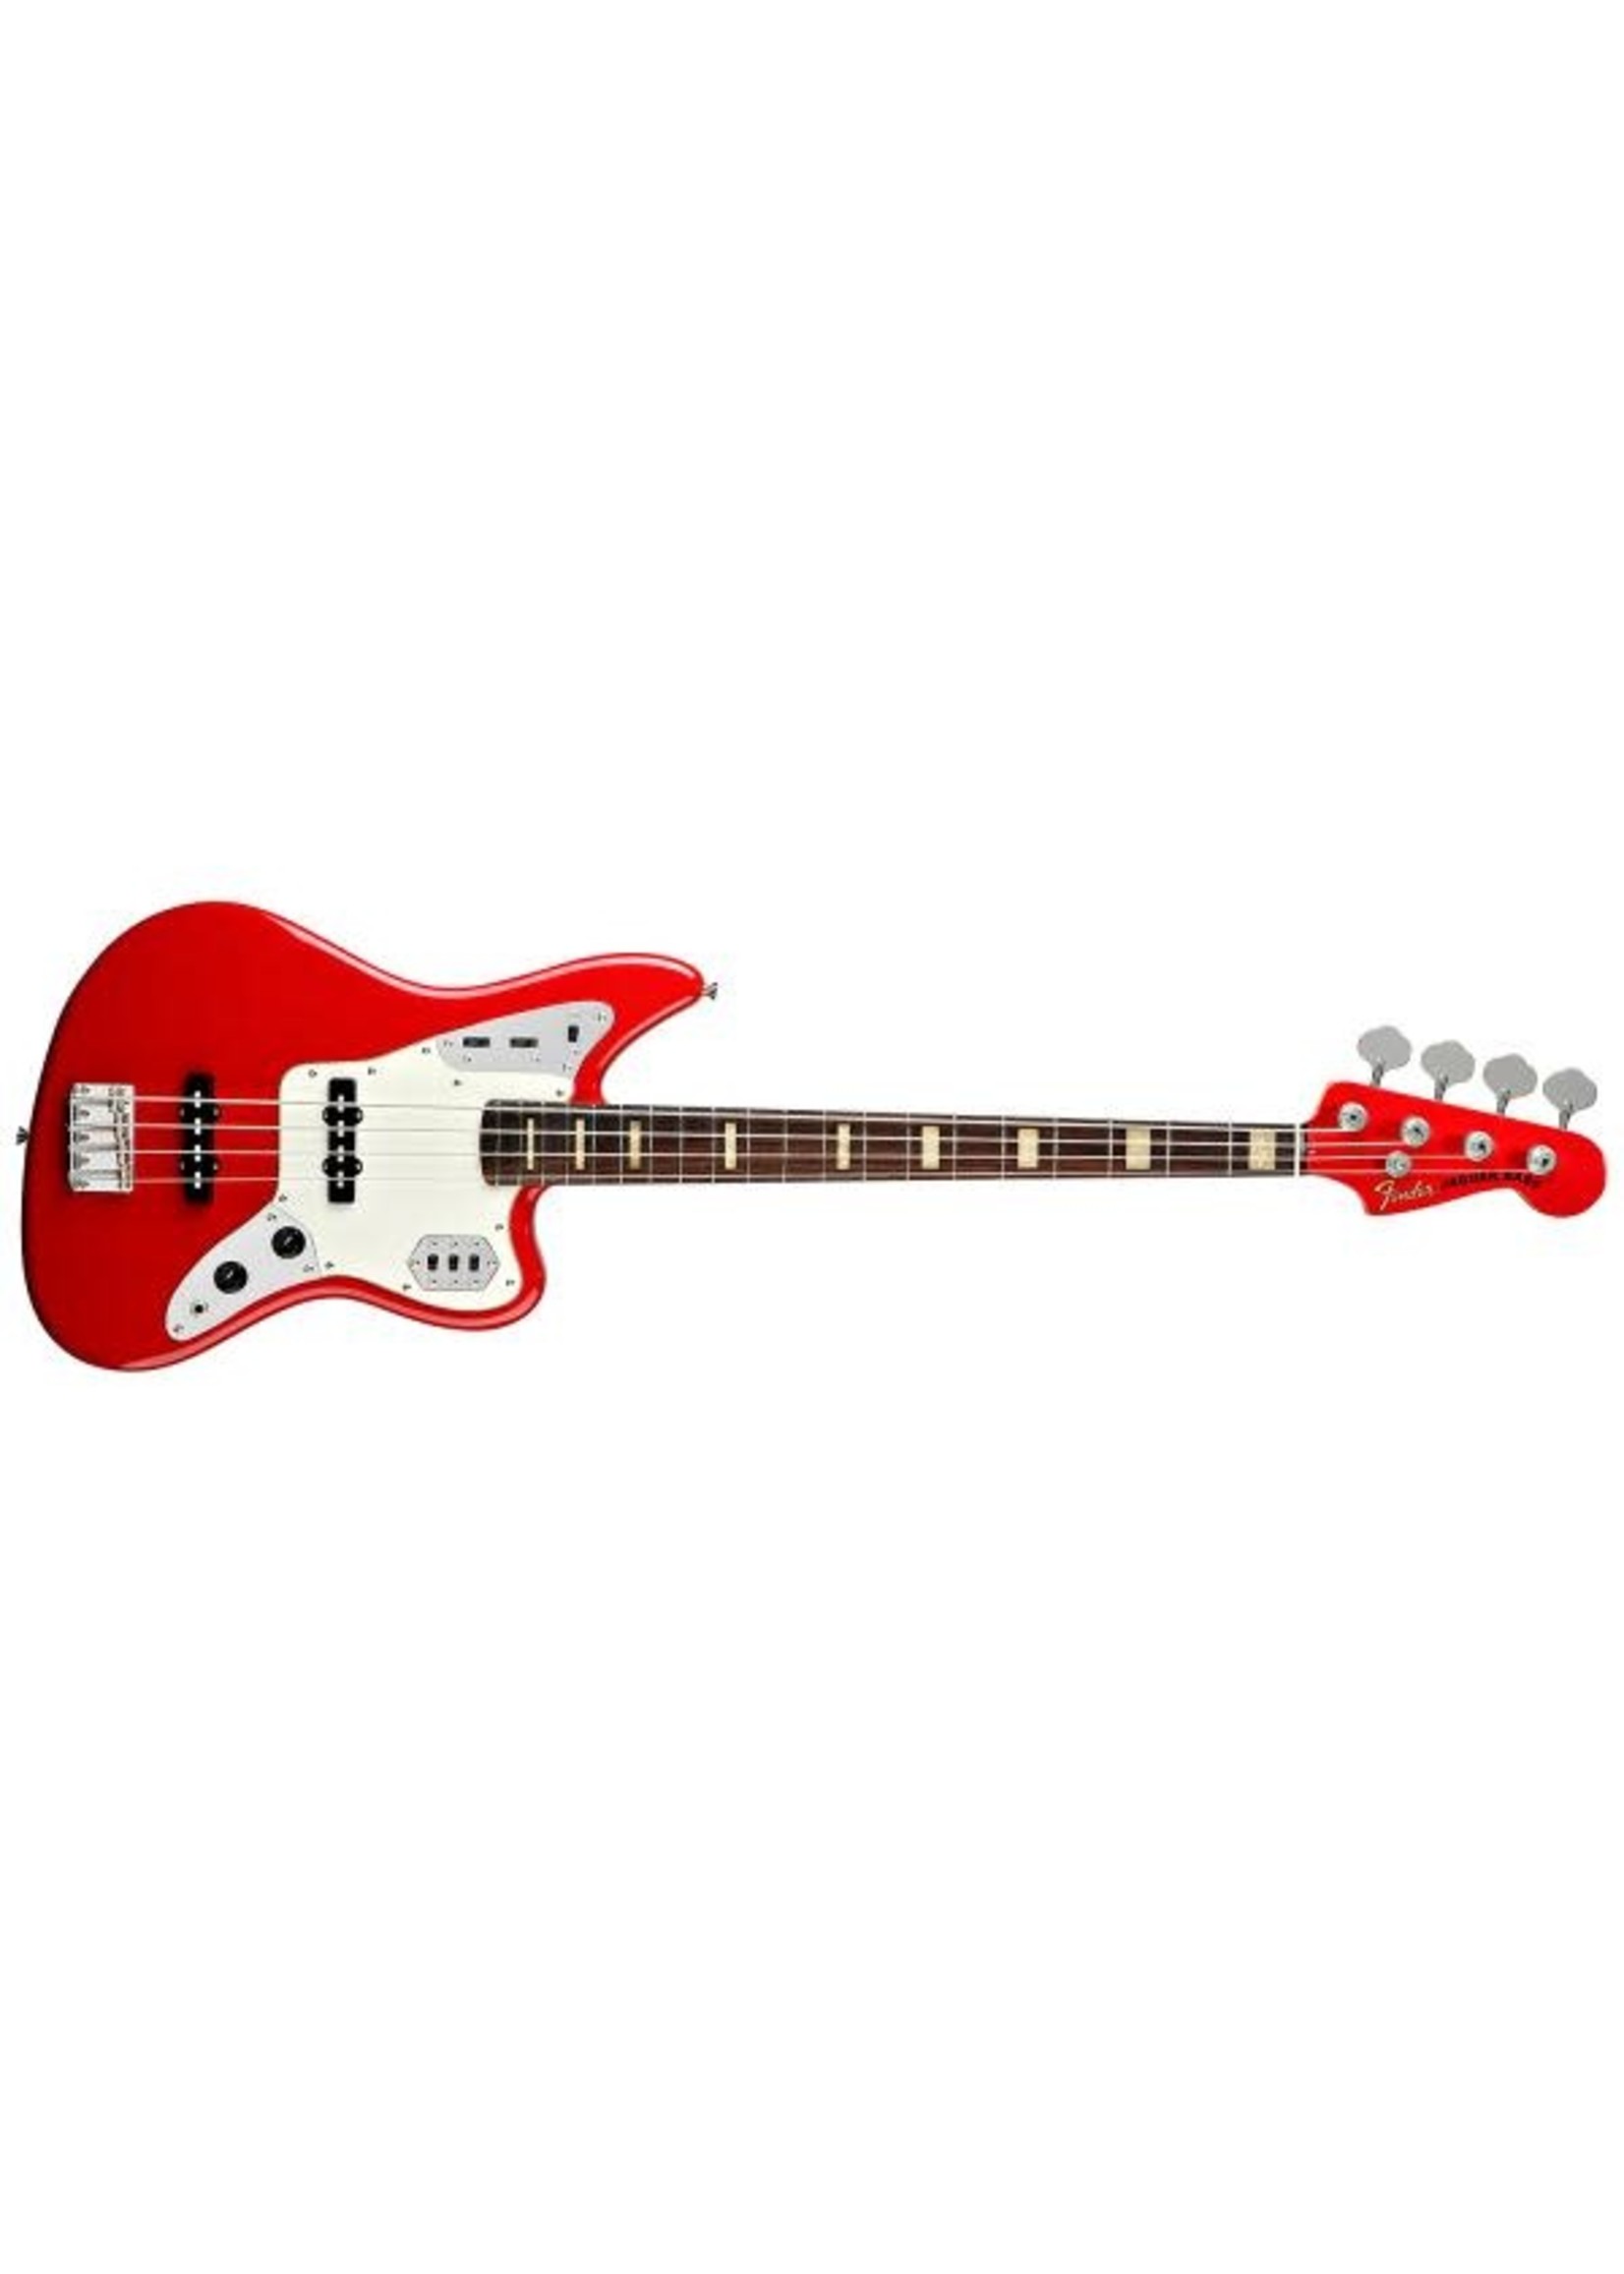 Pre-Owned Fender Jaguar Bass Japan Candy Apple Red 34" with Padded Soft Case